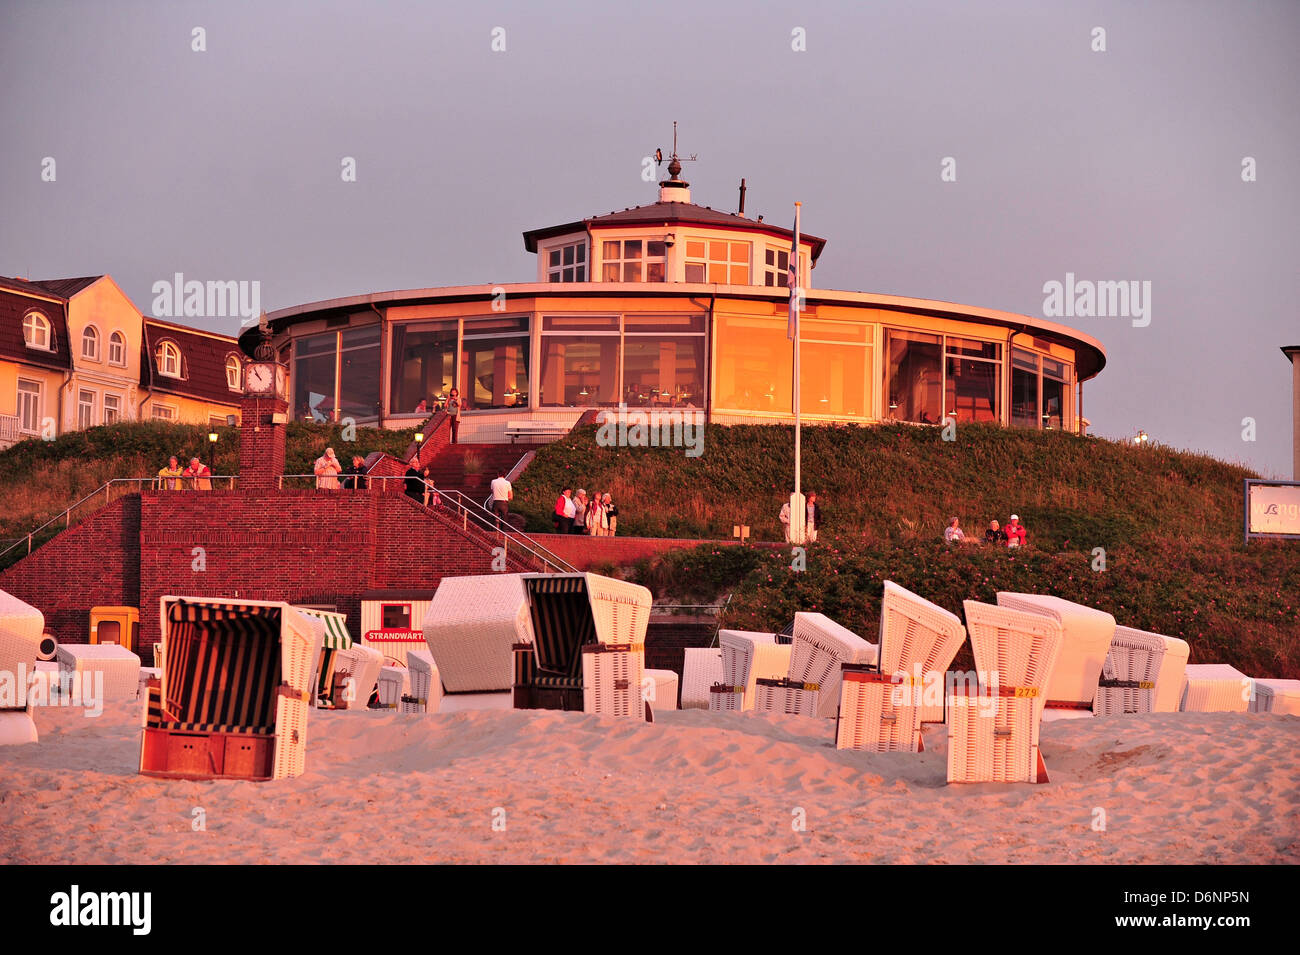 Wangerooge, Germany, pudding Cafe on the beach promenade at sunset Stock Photo